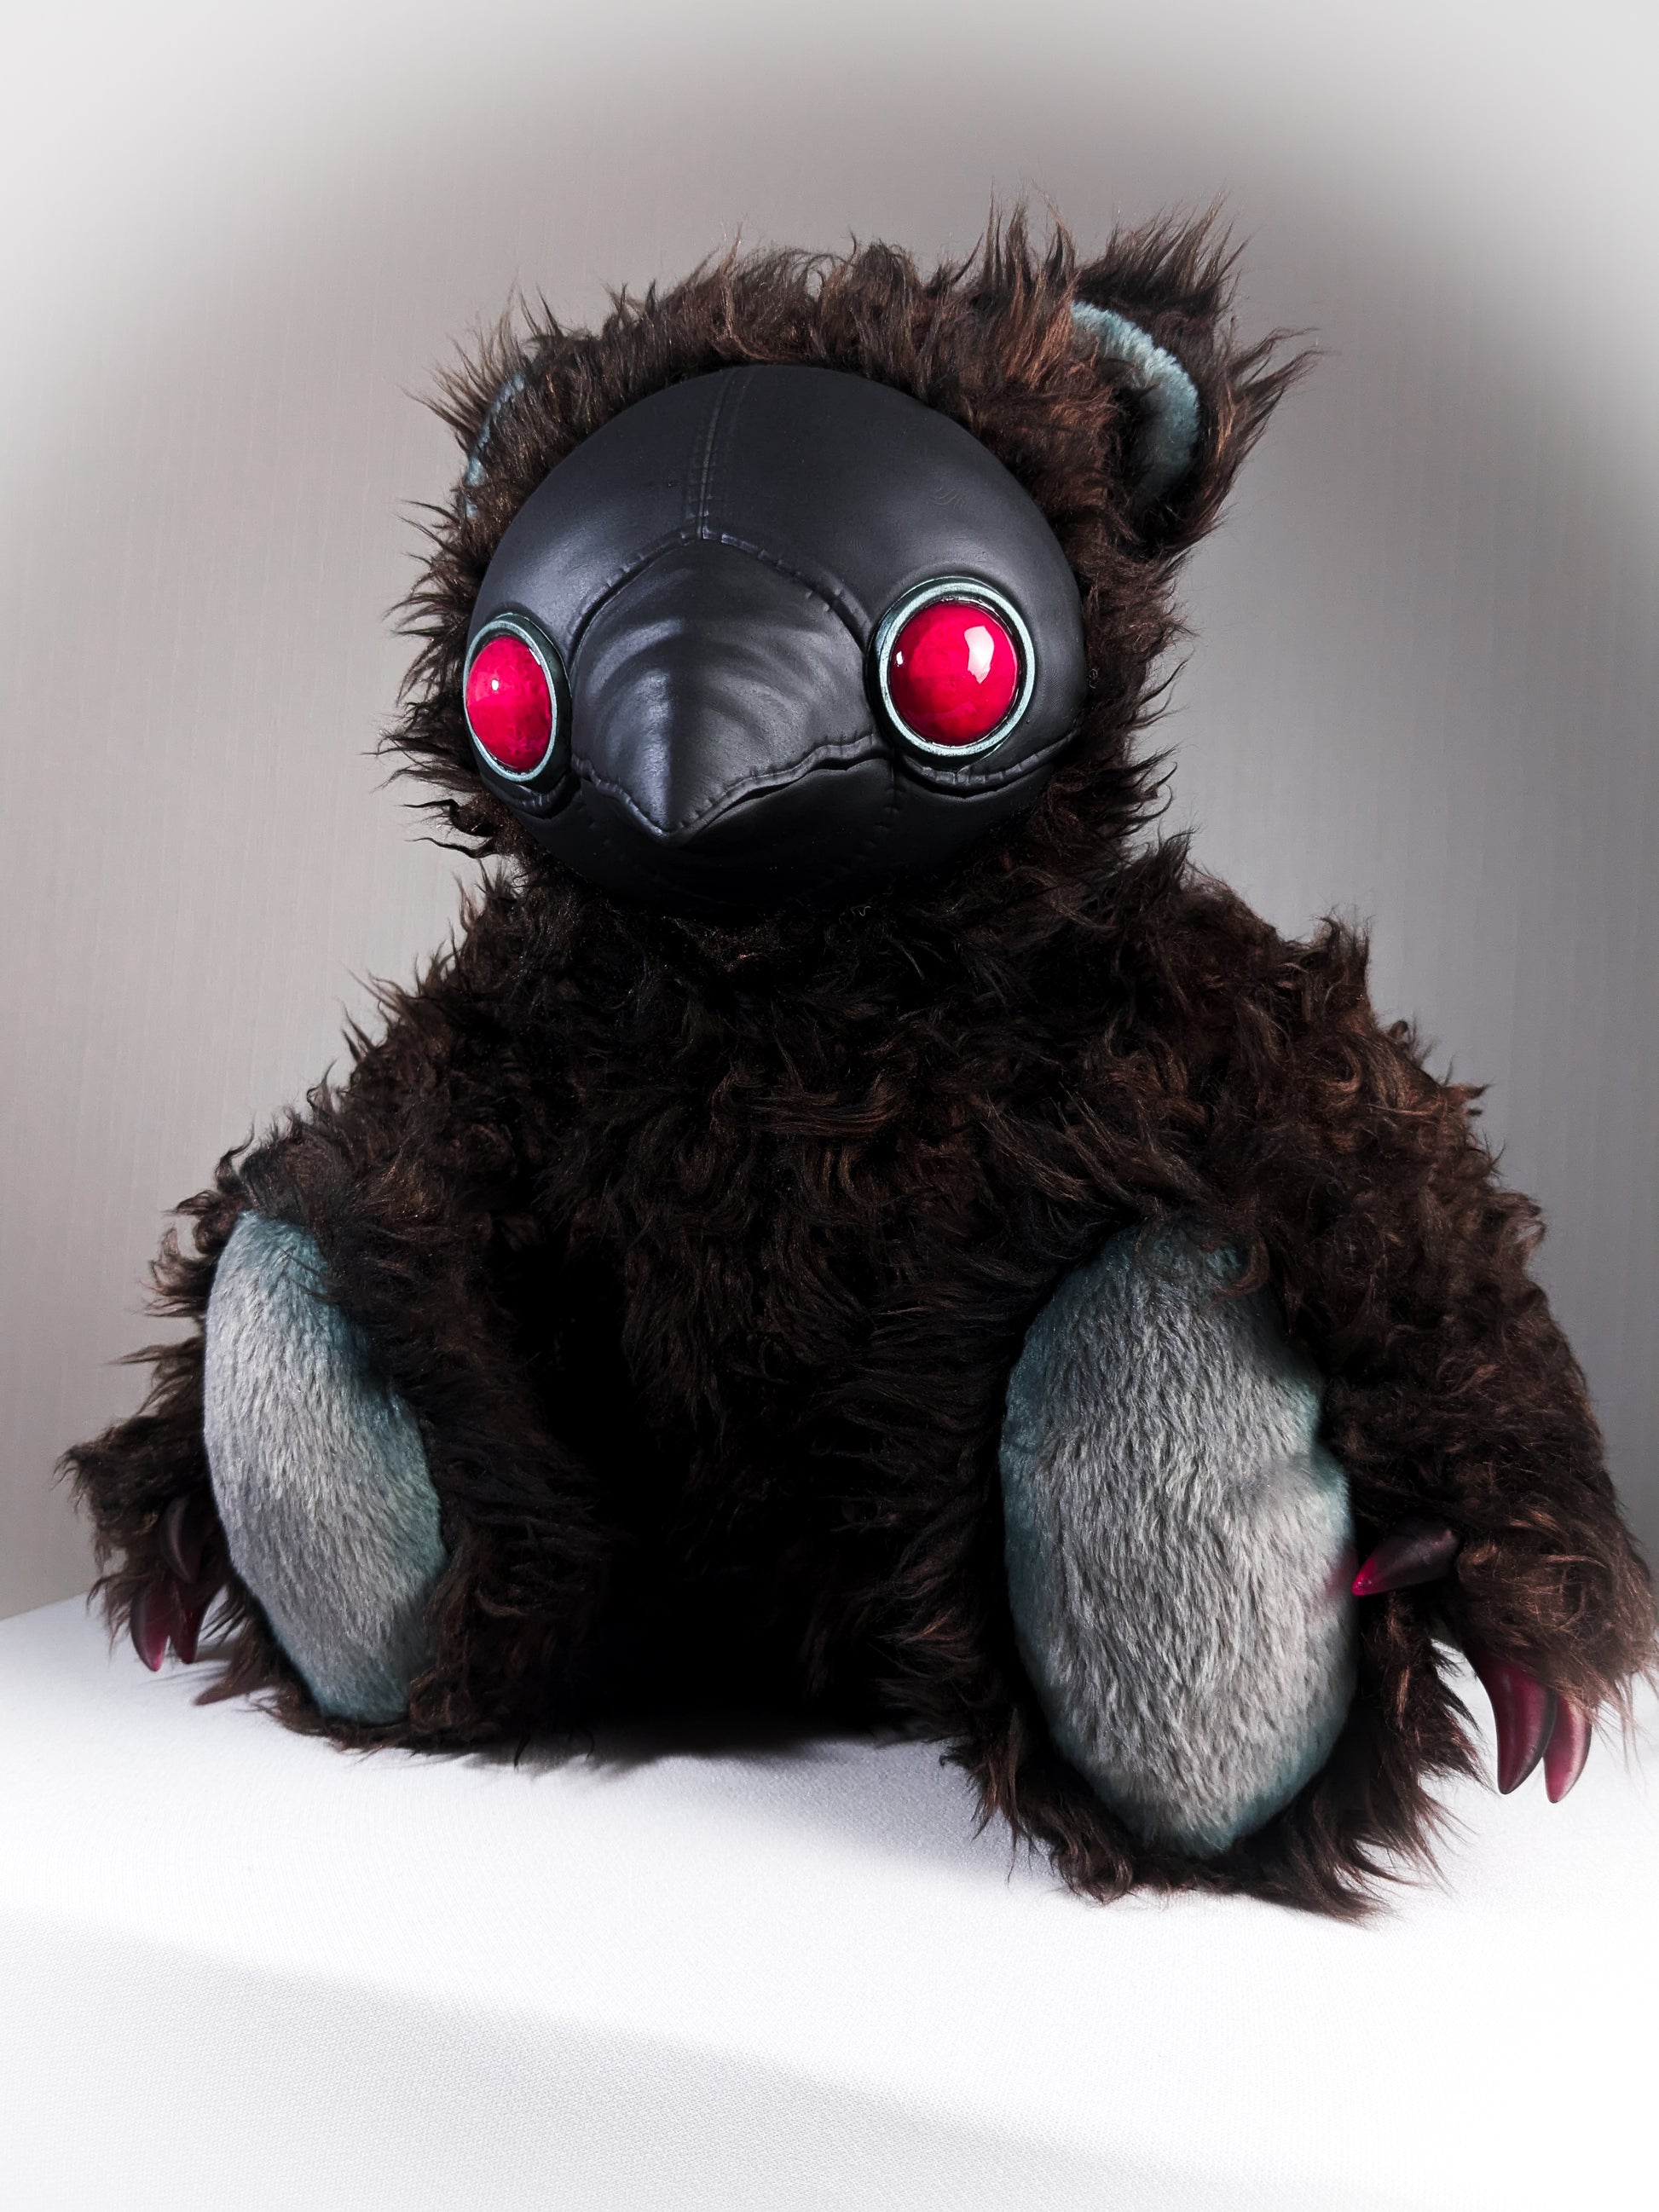 Curious Remedies: AMBROISE - CRYPTCRITZ Handcrafted Creepy Cute Plague Doctor Art Doll Plush Toy for Eccentric Souls